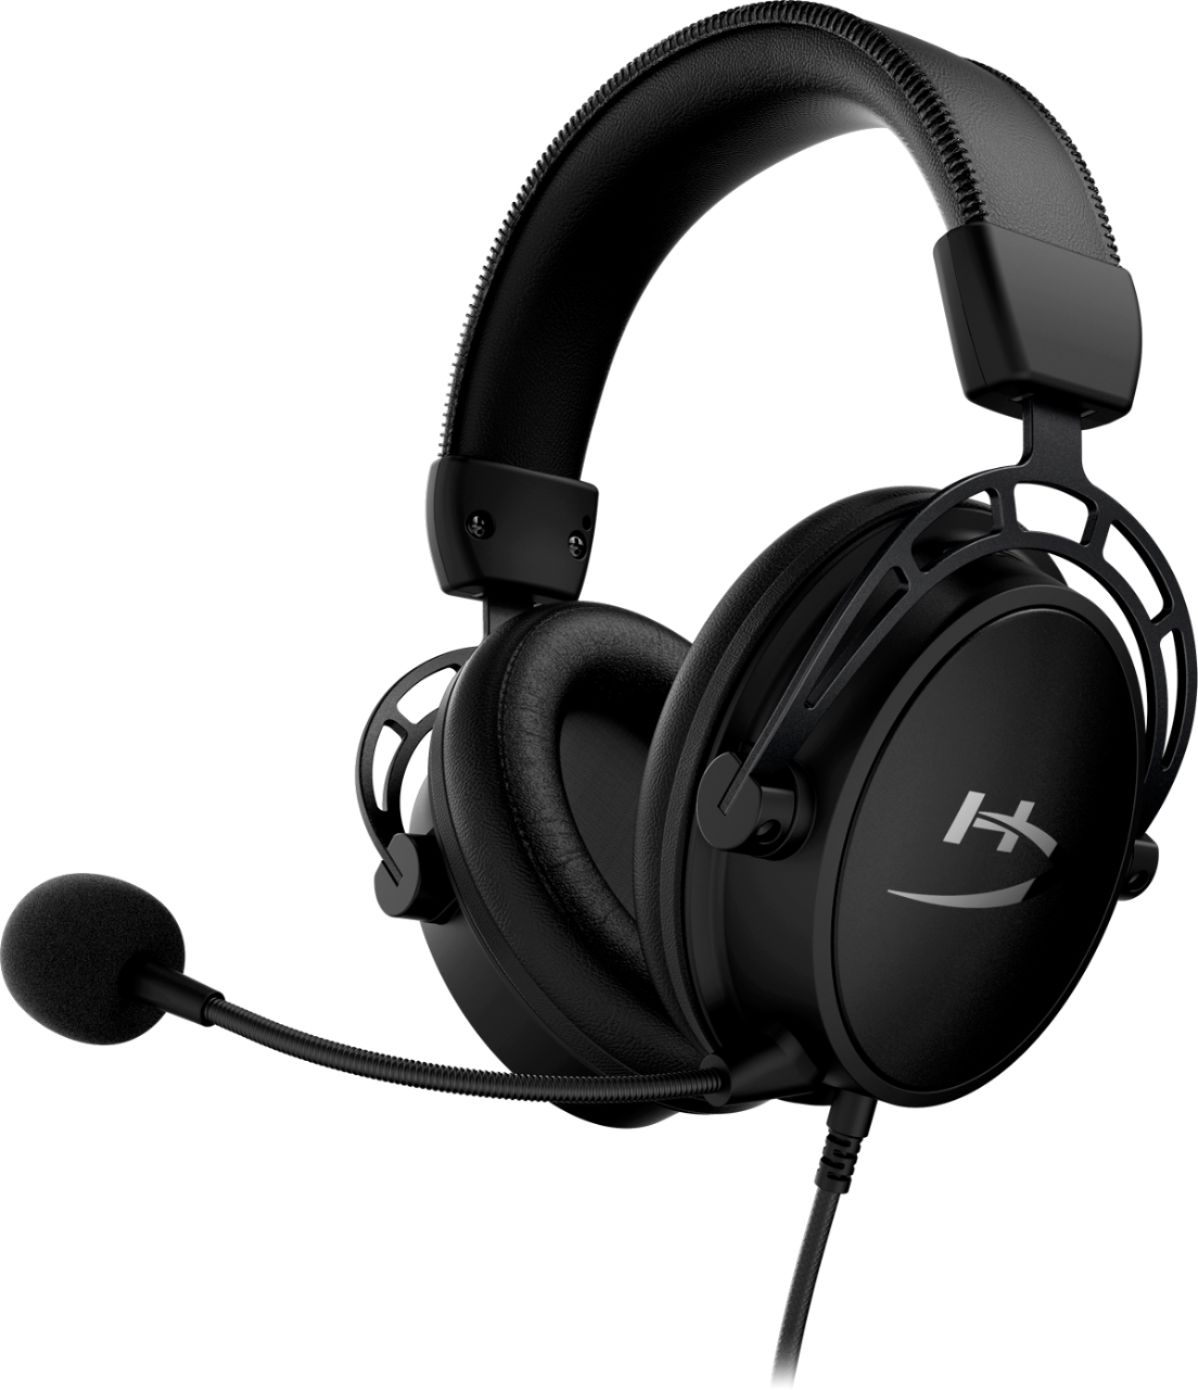 (EXPIRED) HyperX Cloud Alpha Pro Wired Stereo Gaming Headset (Black) $59.99 + Free S/H